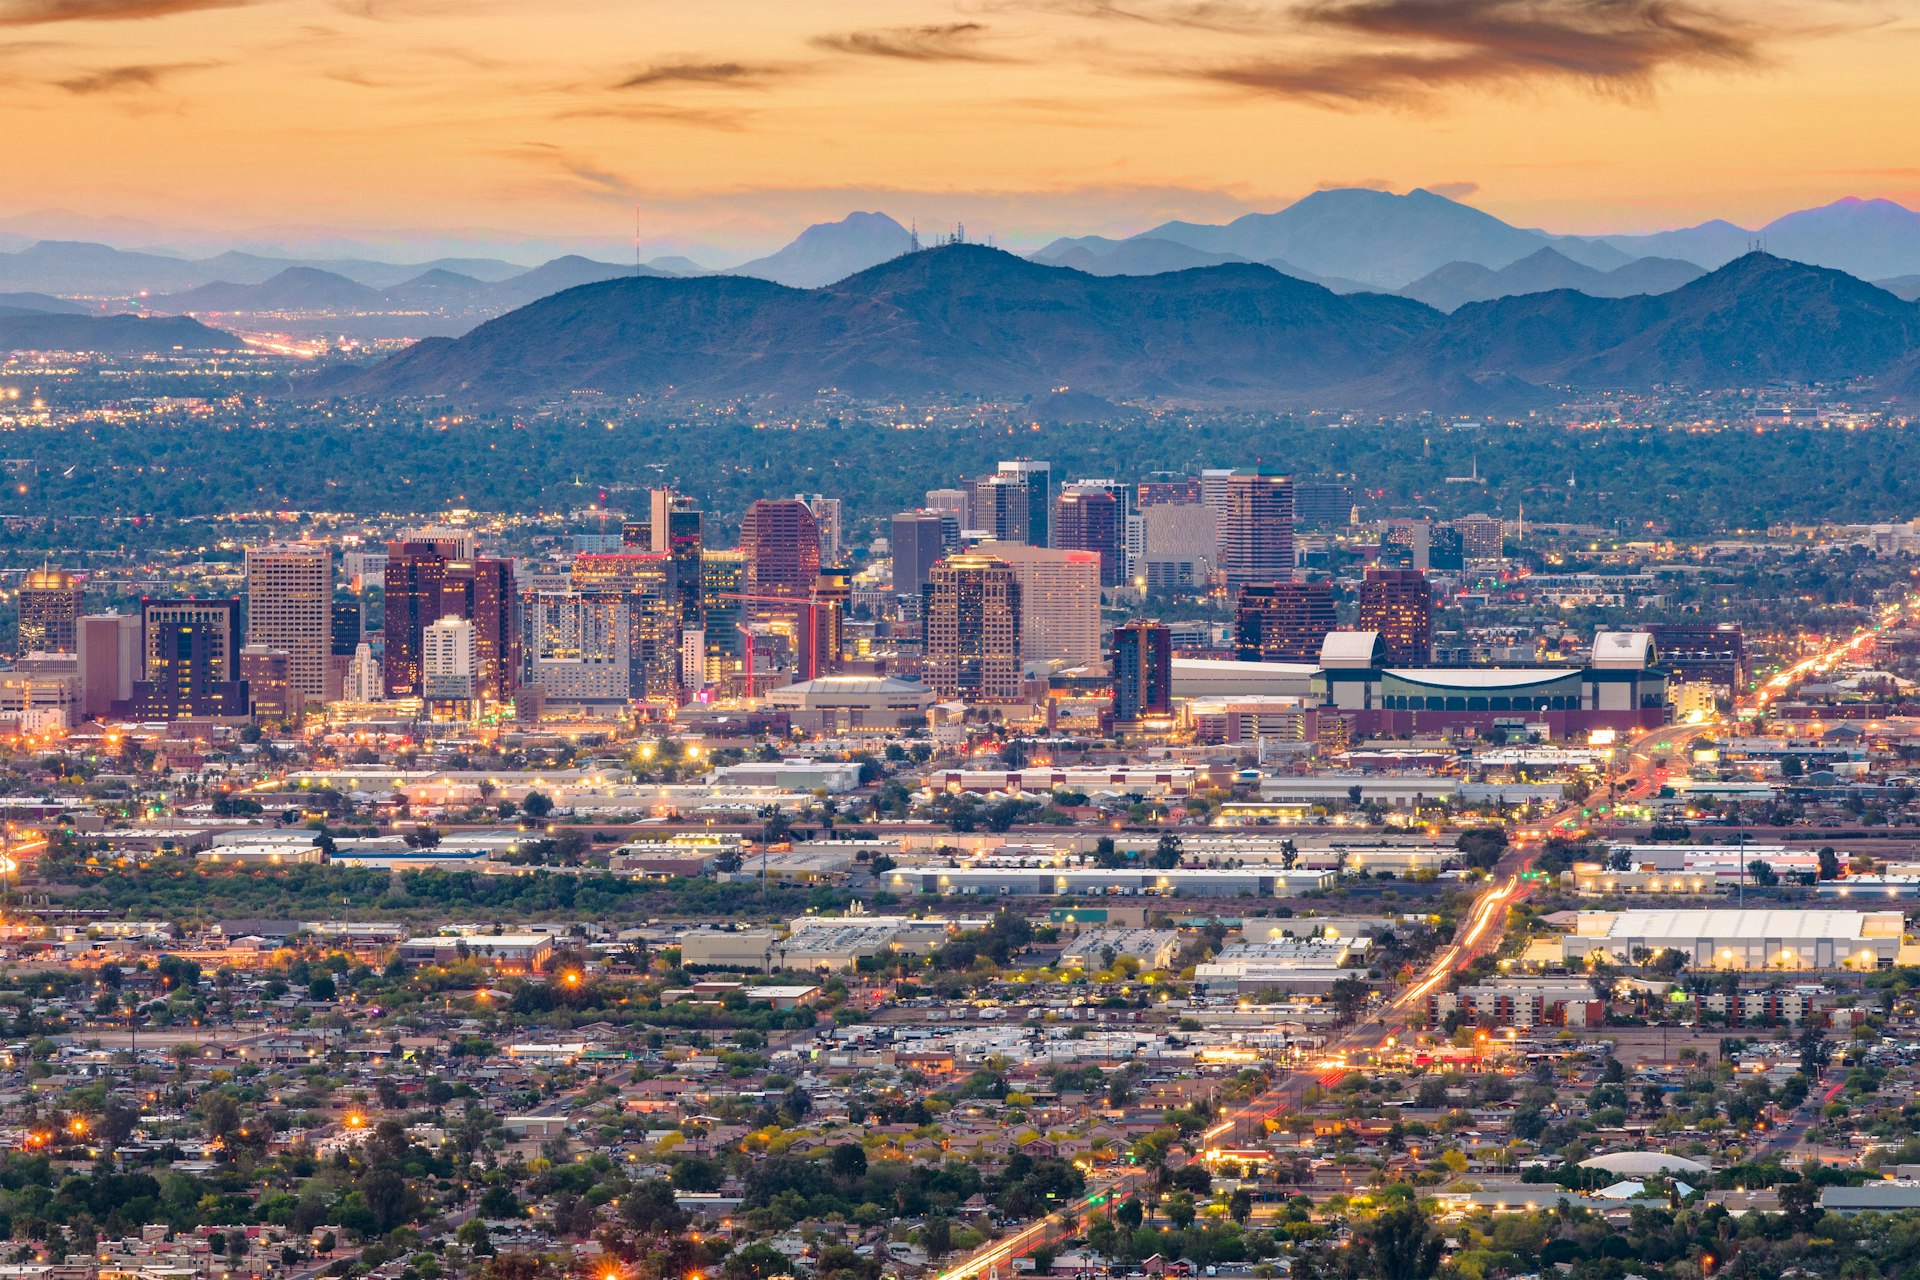 The downtown Phoenix skyline viewed at dusk